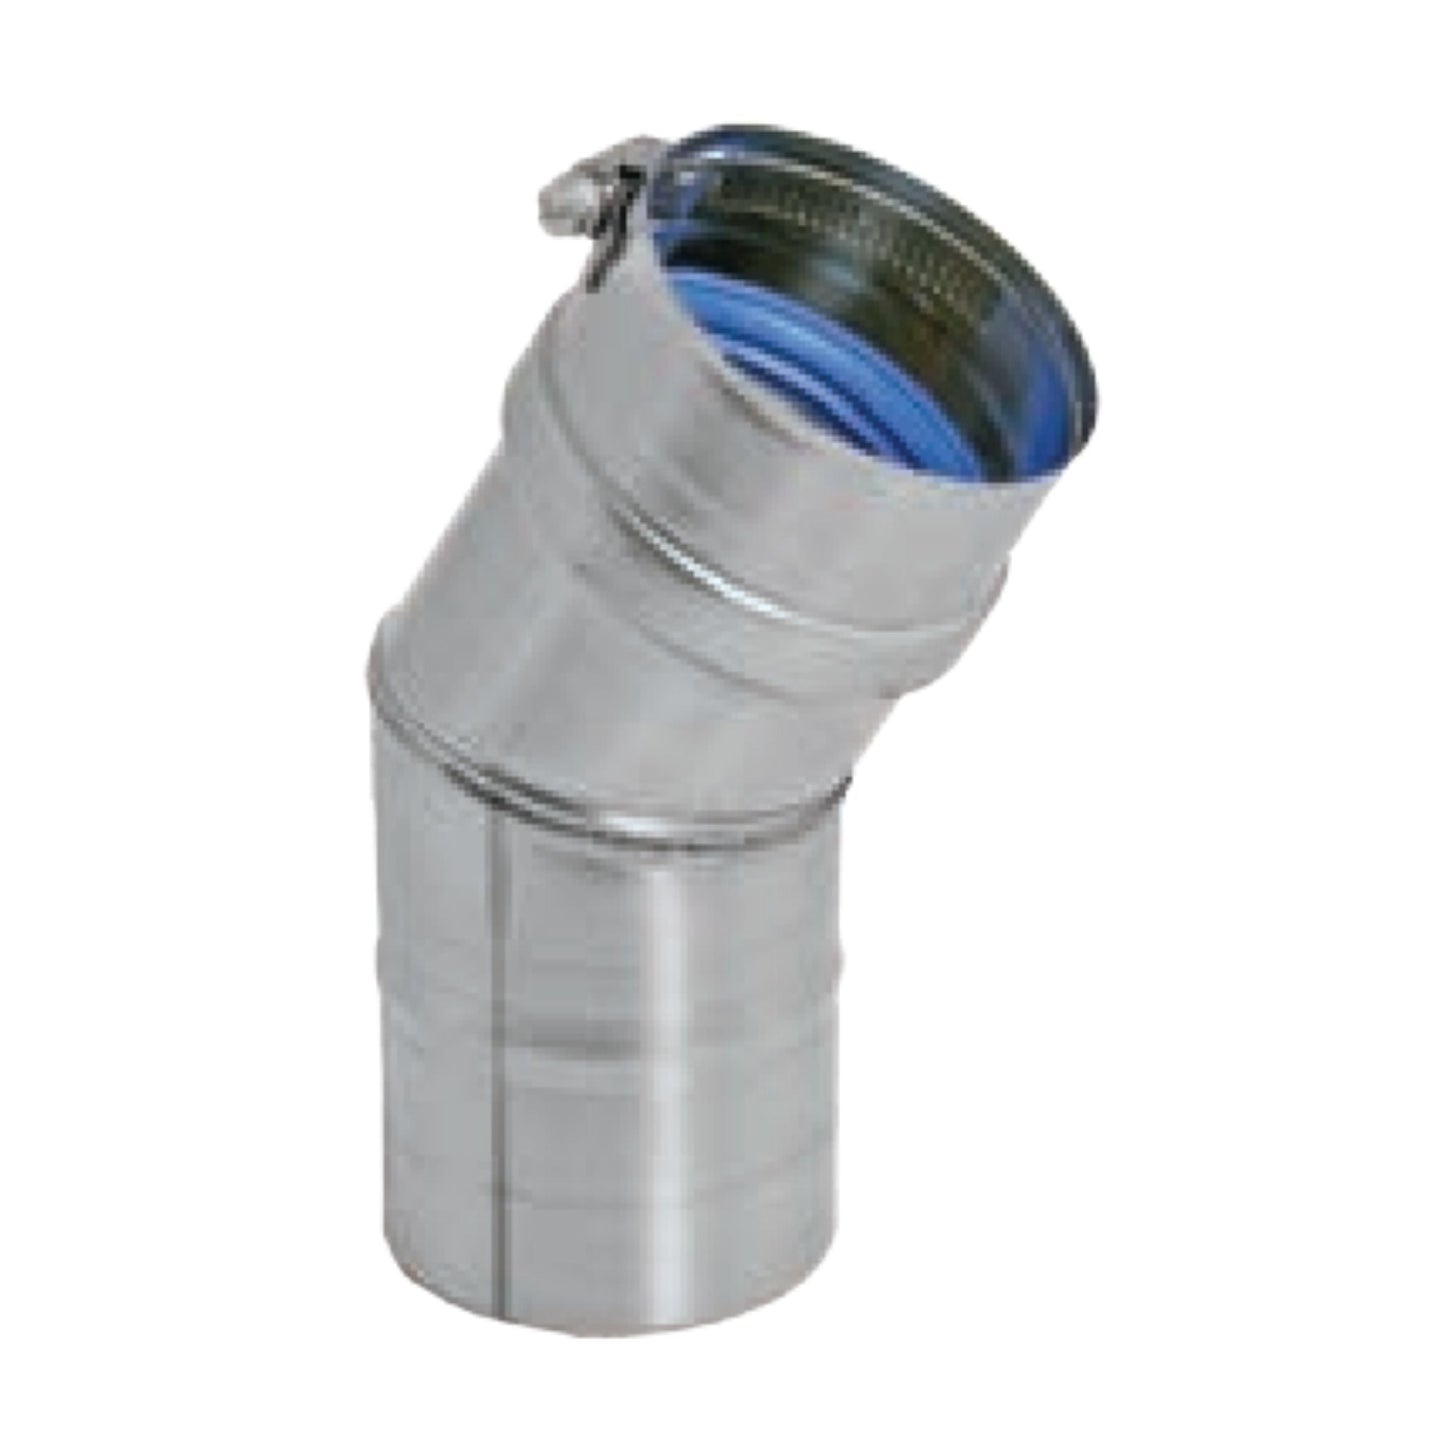 DuraVent FasNSeal 10" 30 Degree 316L Stainless Steel Elbow